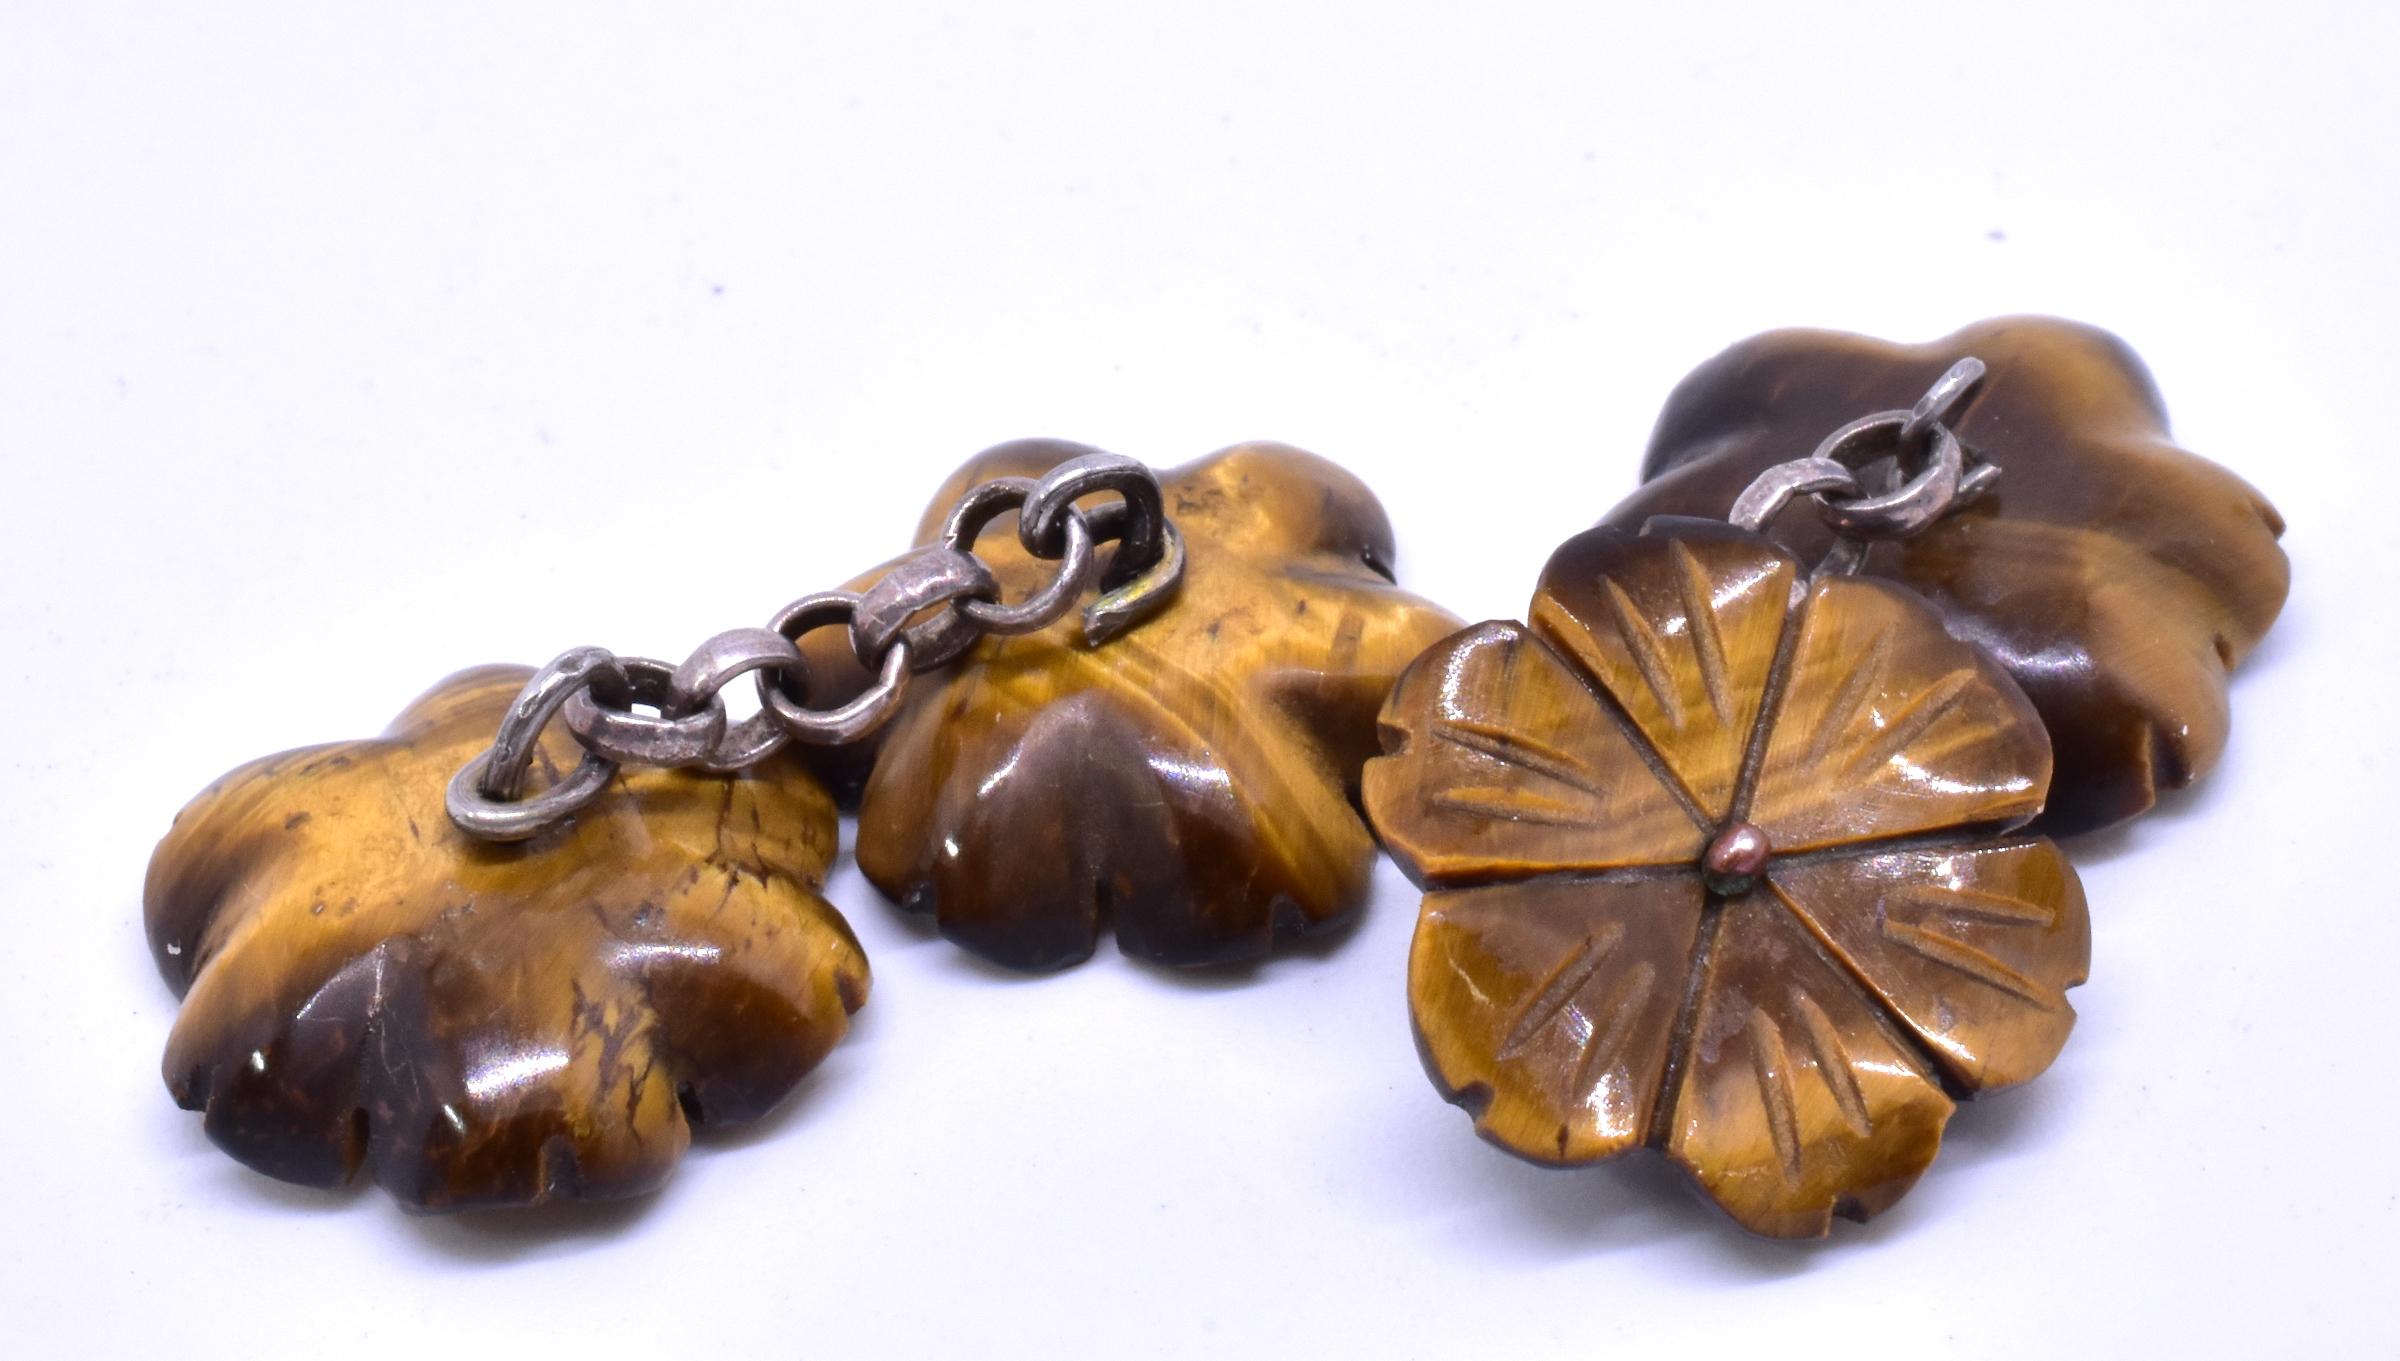 Made of tiger's eye, a yellowish brown chrysoberyl popular in Victorian times, these double sided flower form cufflinks which are linked by a silver chain, have a terrific masculine look that we find especially appealing. Tiger's eye is a little